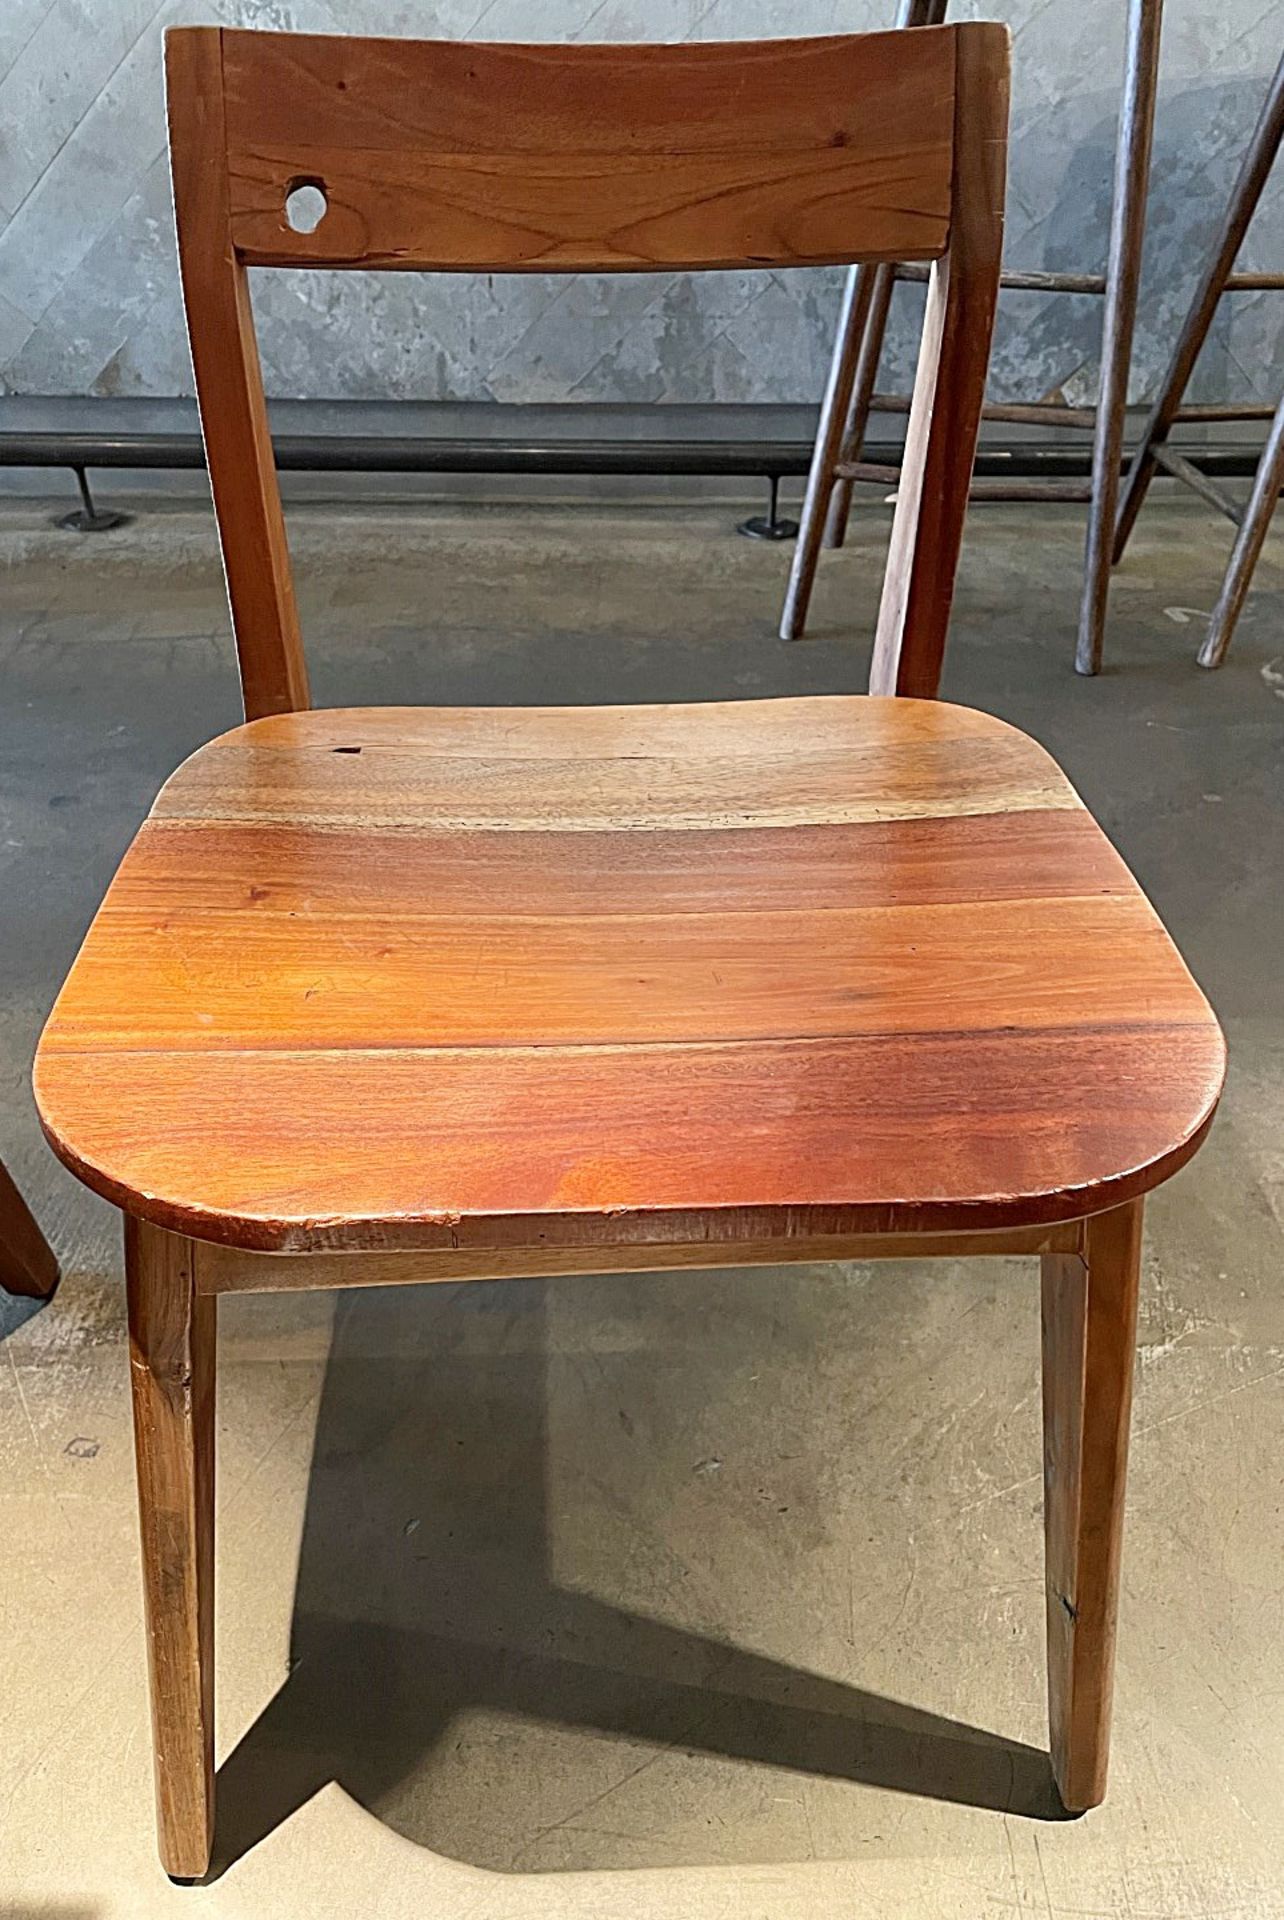 12 x Solid Wood Bistro Dining Chairs - Ref: MAN141 - CL677 - Location: London W1FThis item is to - Image 2 of 12